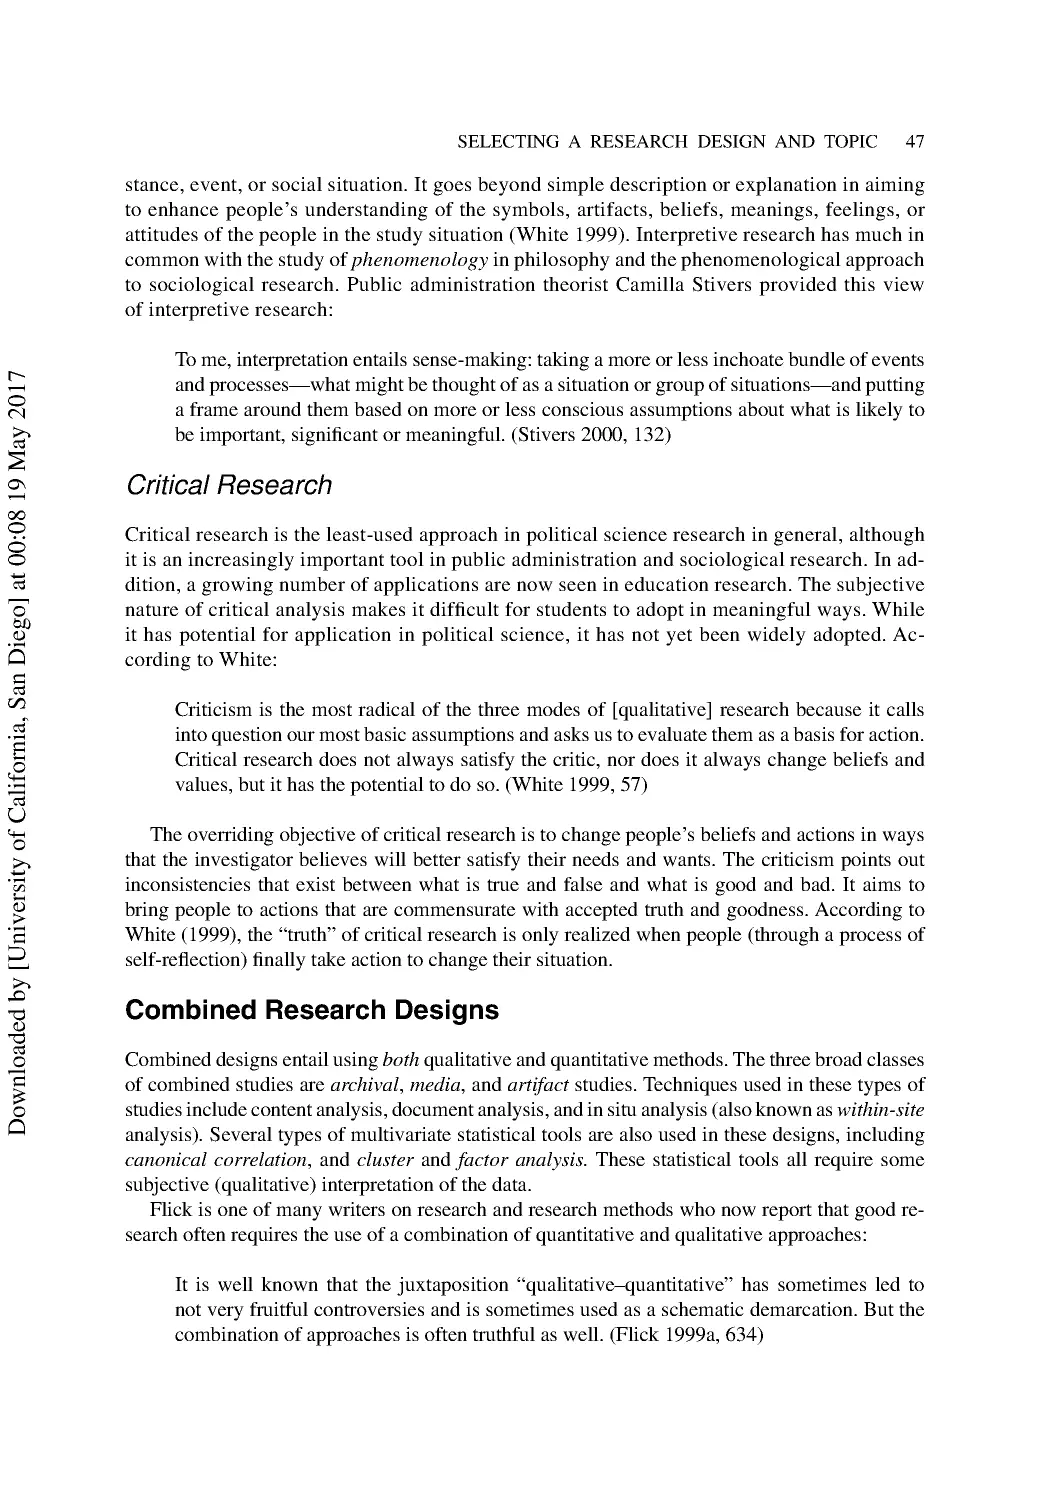 Combined Research Designs